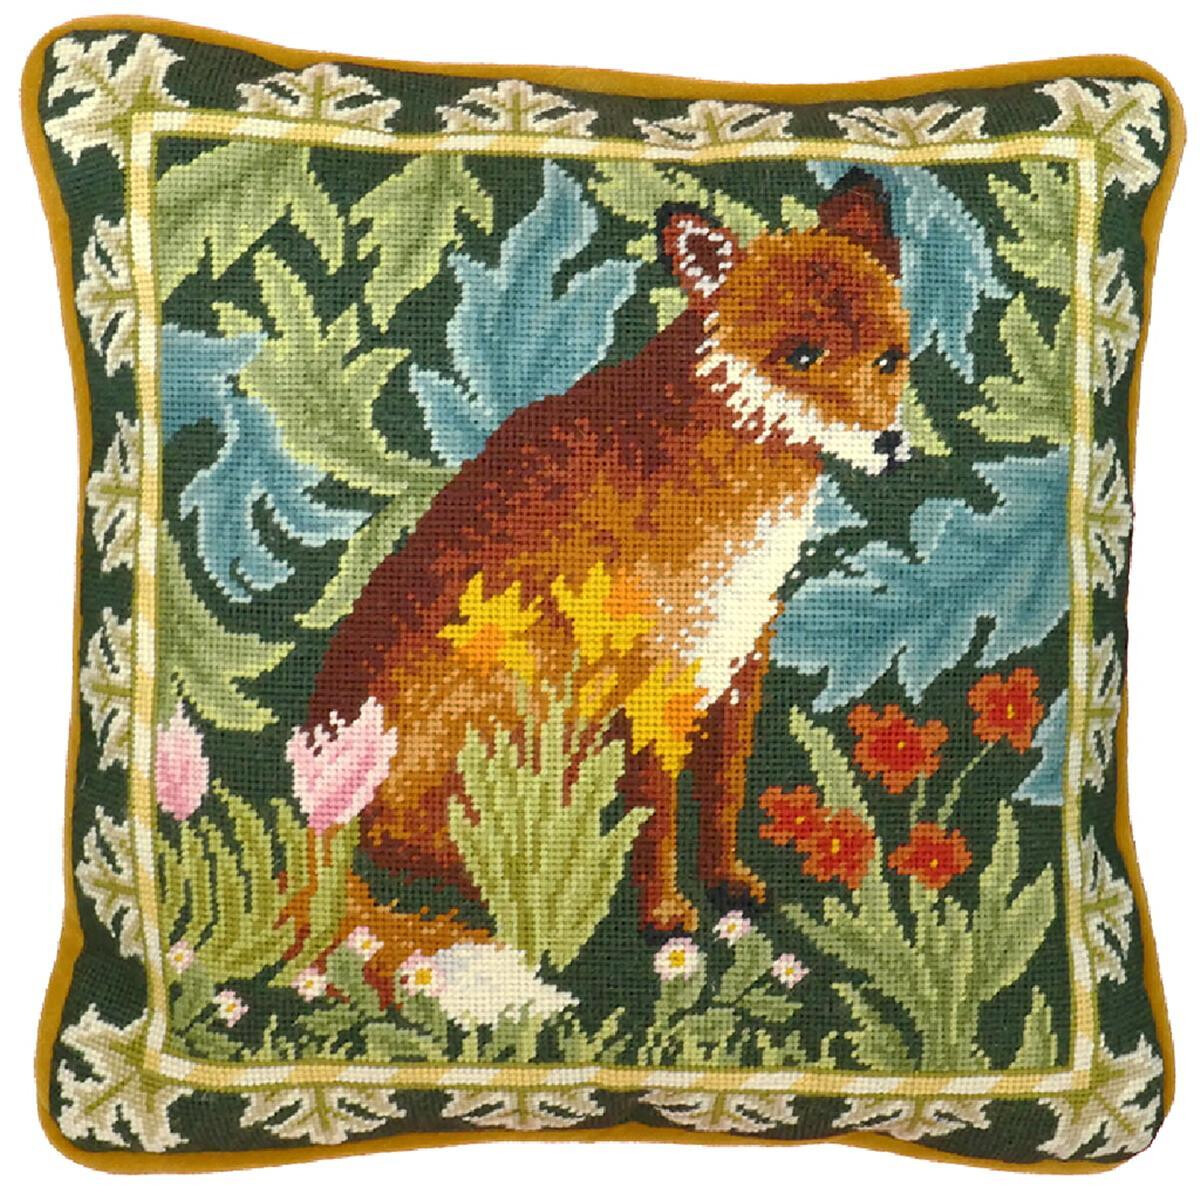 A decorative square cushion with a detailed cross stitch...